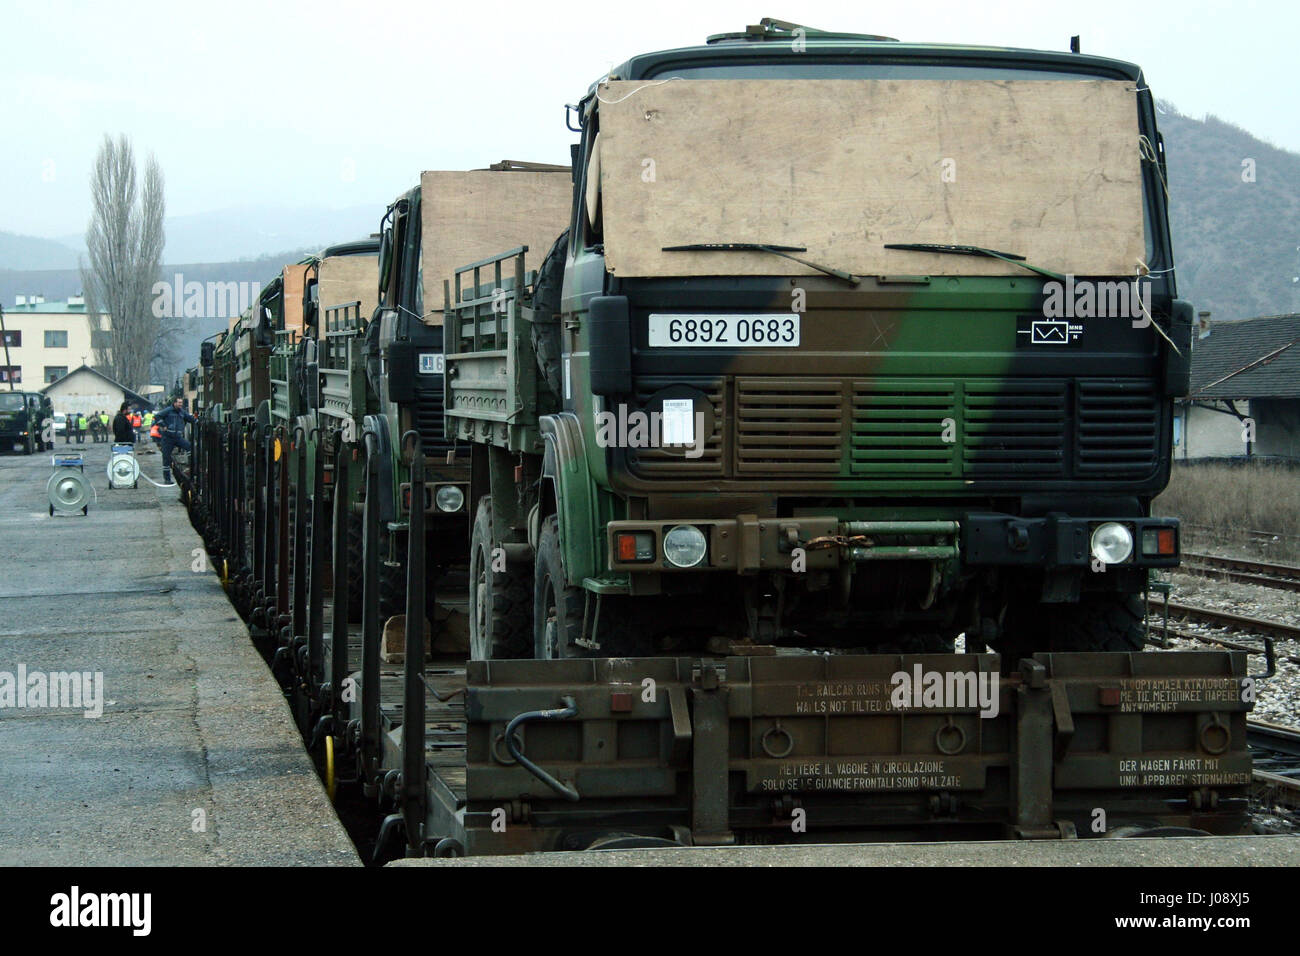 MITROVICA, KOSOVO - FEBRUARY 17, 2009: French army truck being shipped on a train, ready to leave the train station of Kosovska Mitrovica, as a part o Stock Photo